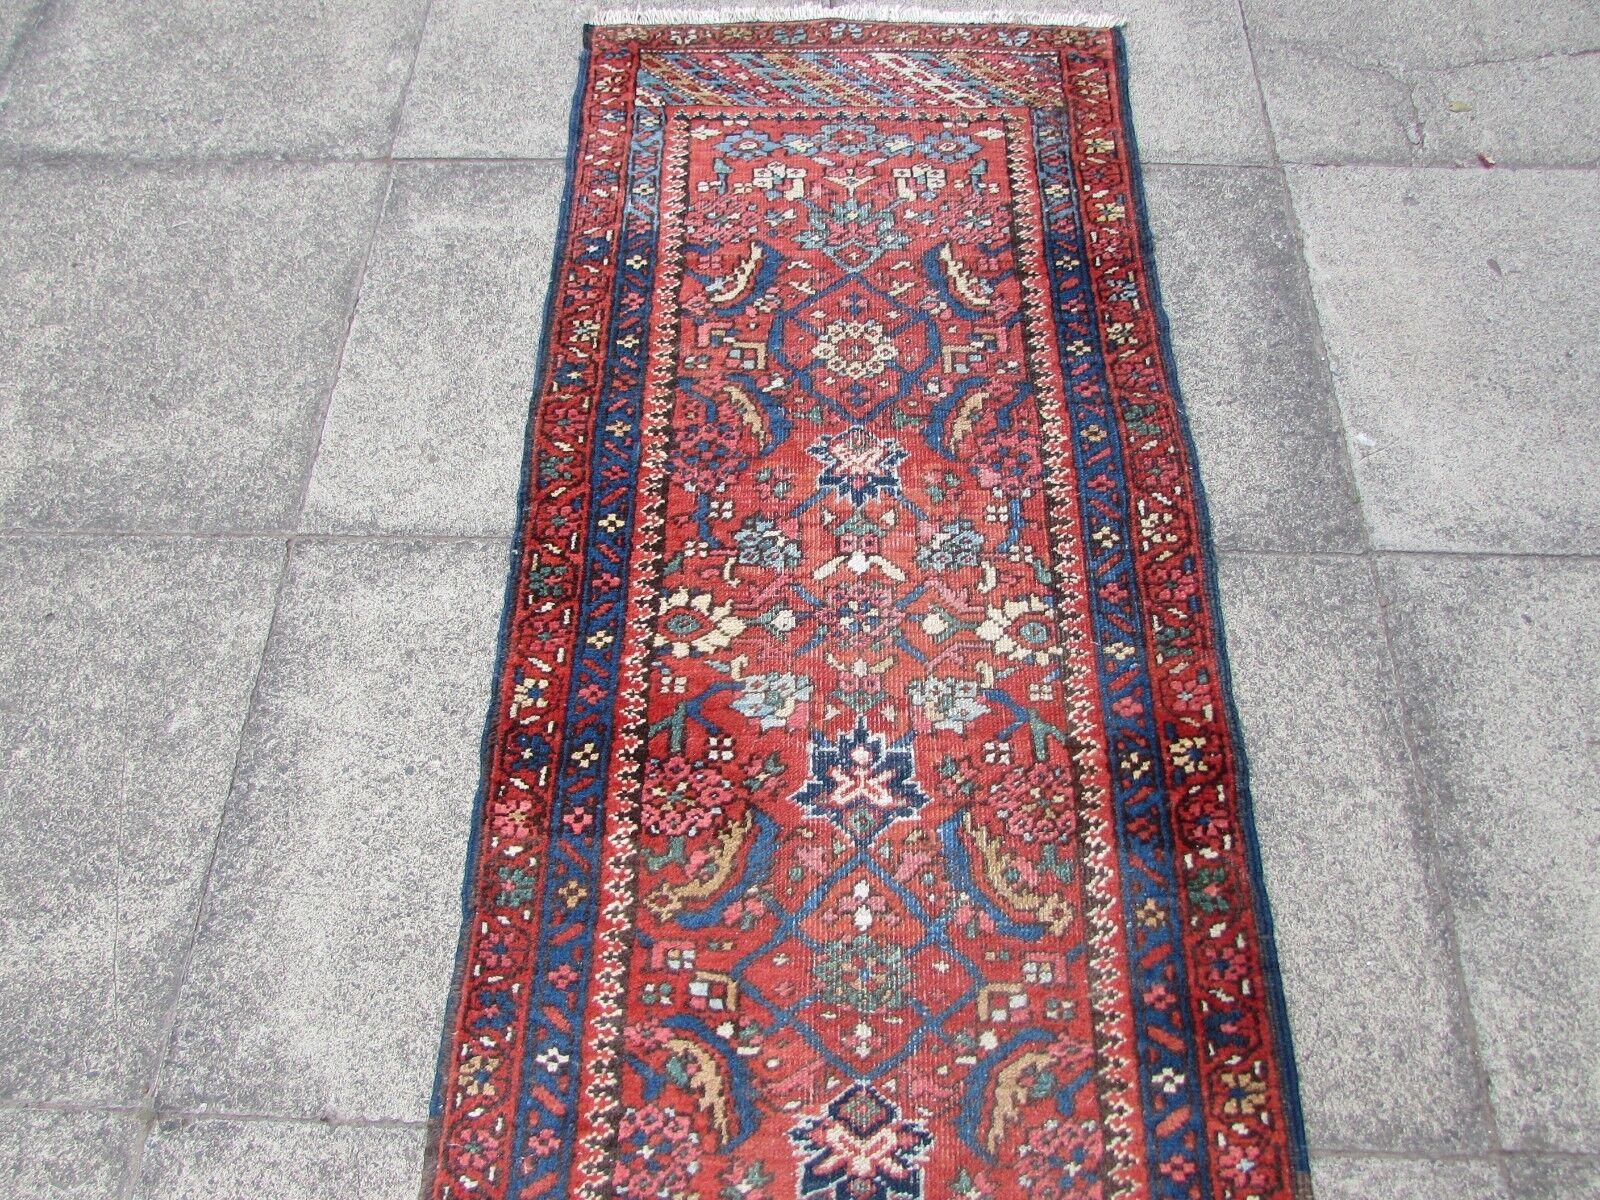 Enhance your home with the enchanting beauty of this Handmade Antique Persian Style Mahal Runner Rug. Dating back to the 1920s, this rug brings a touch of history and artistry to your living space.

Key Features:

Size: Measuring 2.5' x 12.1', this